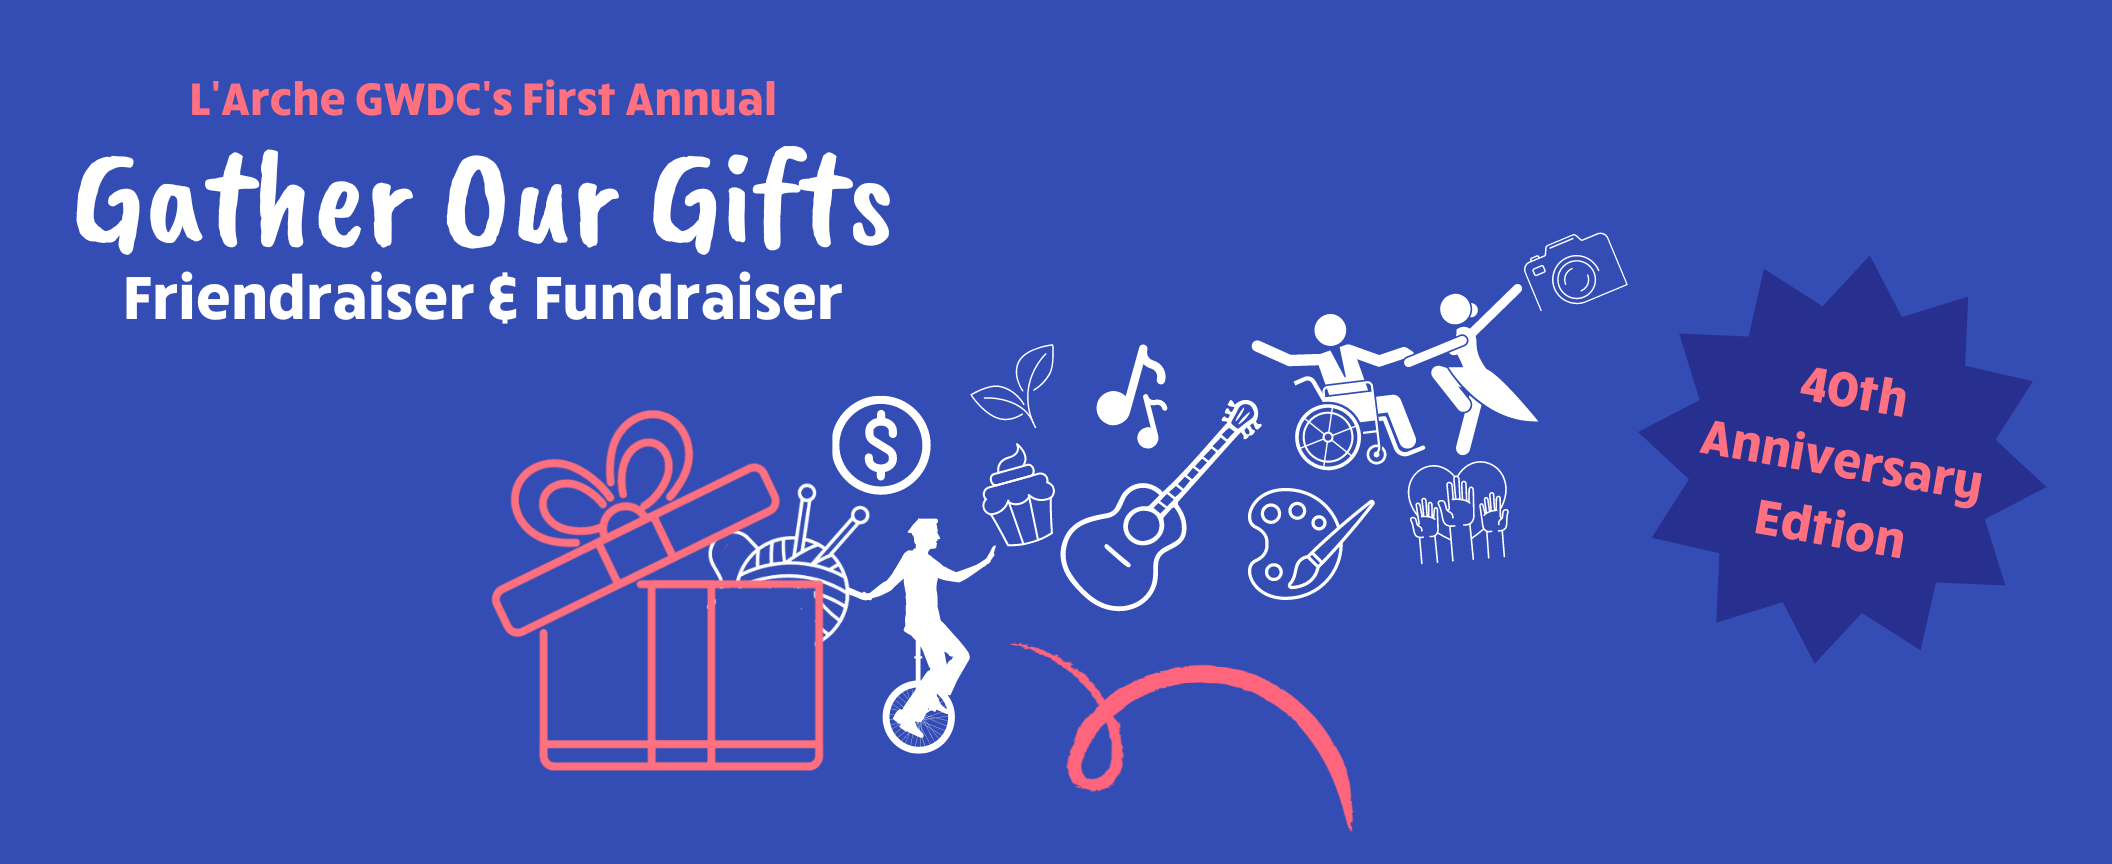 Images of various talents (ie: music notes, dancers, yarn, unicyclist), spill out of a pink gift box. Text reads: L'Arche GWDC's First Annual Gather Our Gifts Friendraiser & Fundraiser. 40th Anniversary Edition.